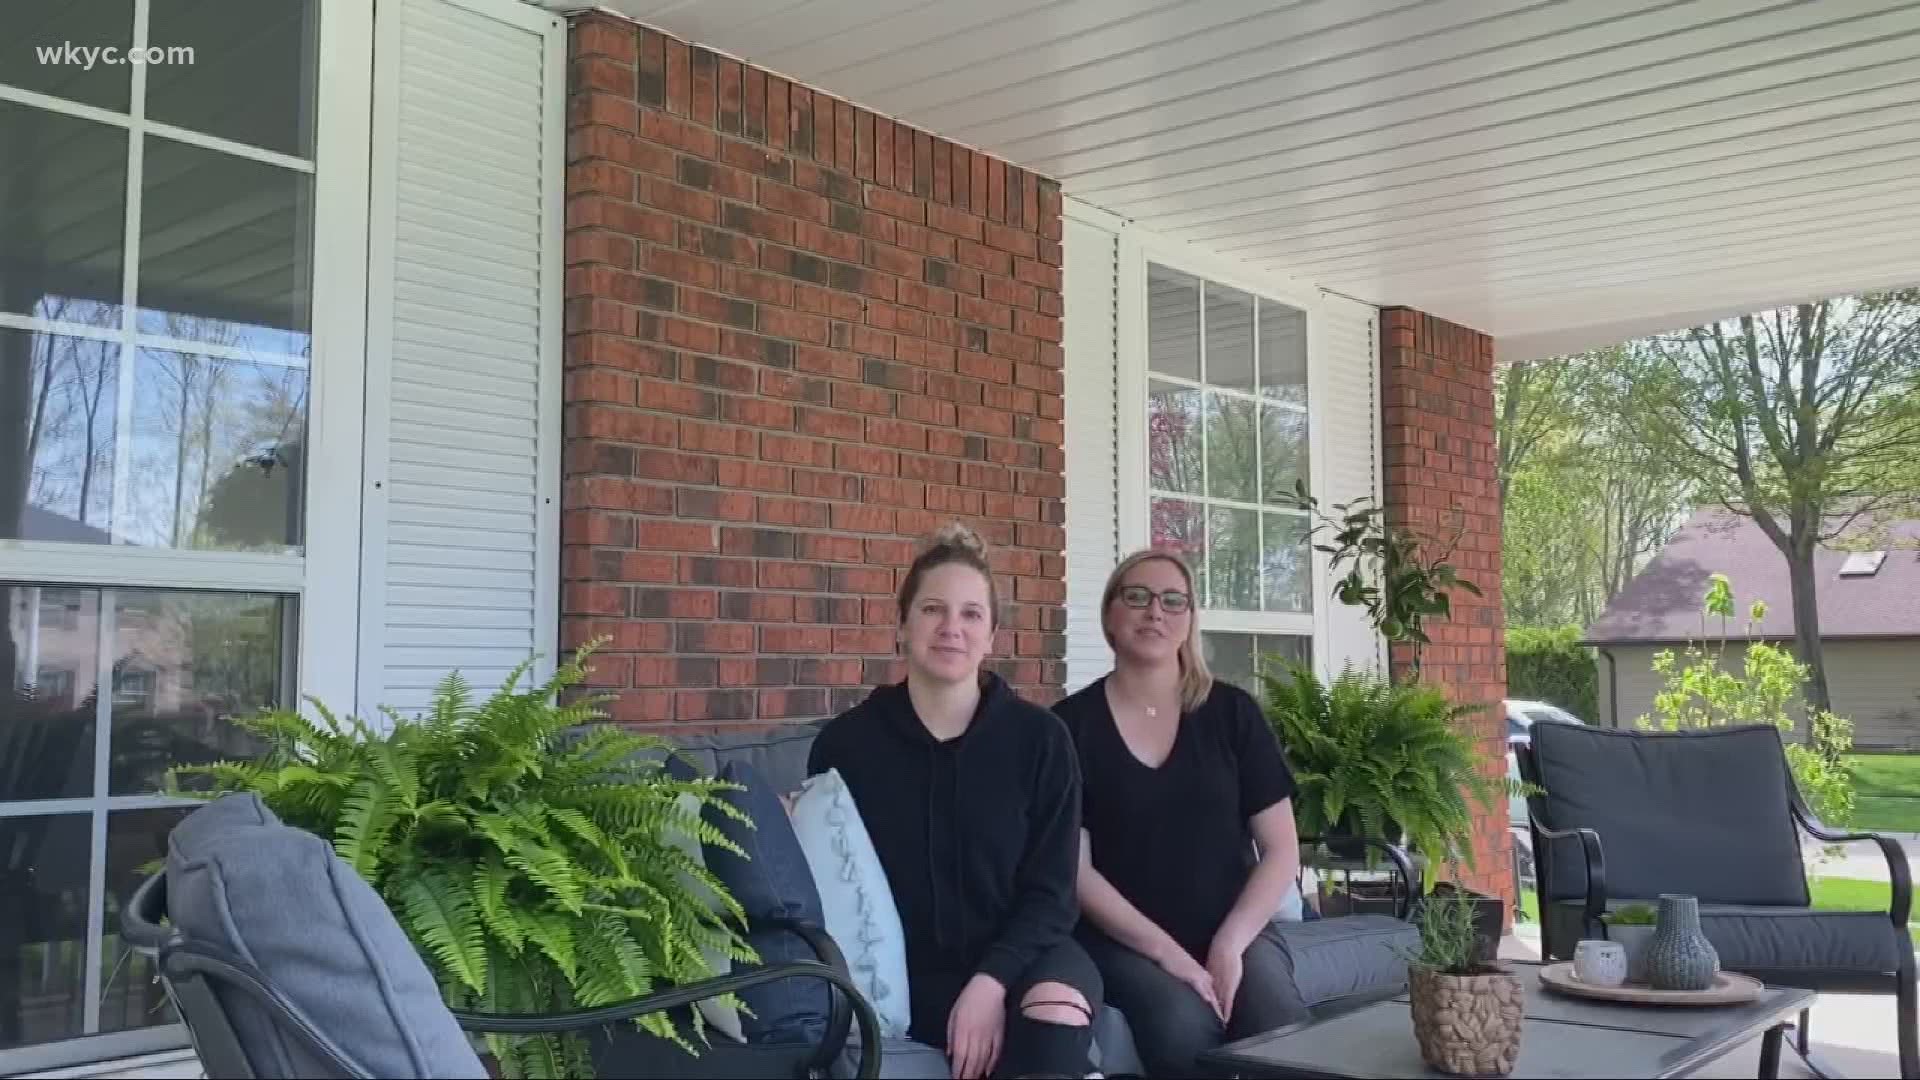 Here are our friends from Ashleigh Clark Interior Design with some simple and fun ideas to make your porch feel like new. Plants are a major key.